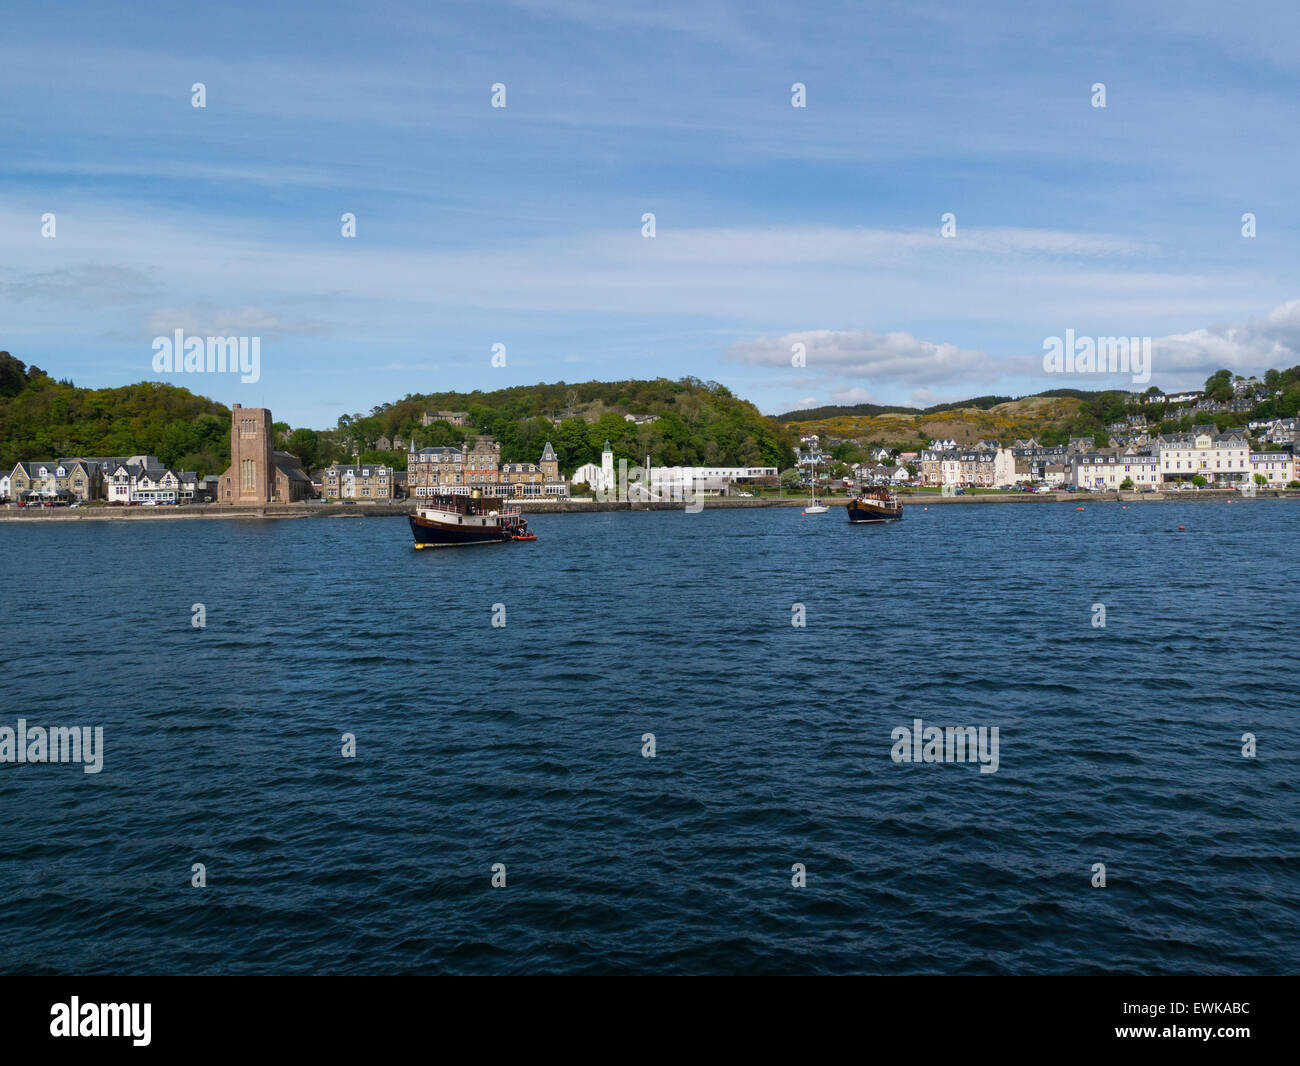 View historic sea front of popular resort town Oban Argyll and Bute Scotland from ferry on Sound of Kerrera on a lovely May day weather blue sky Stock Photo